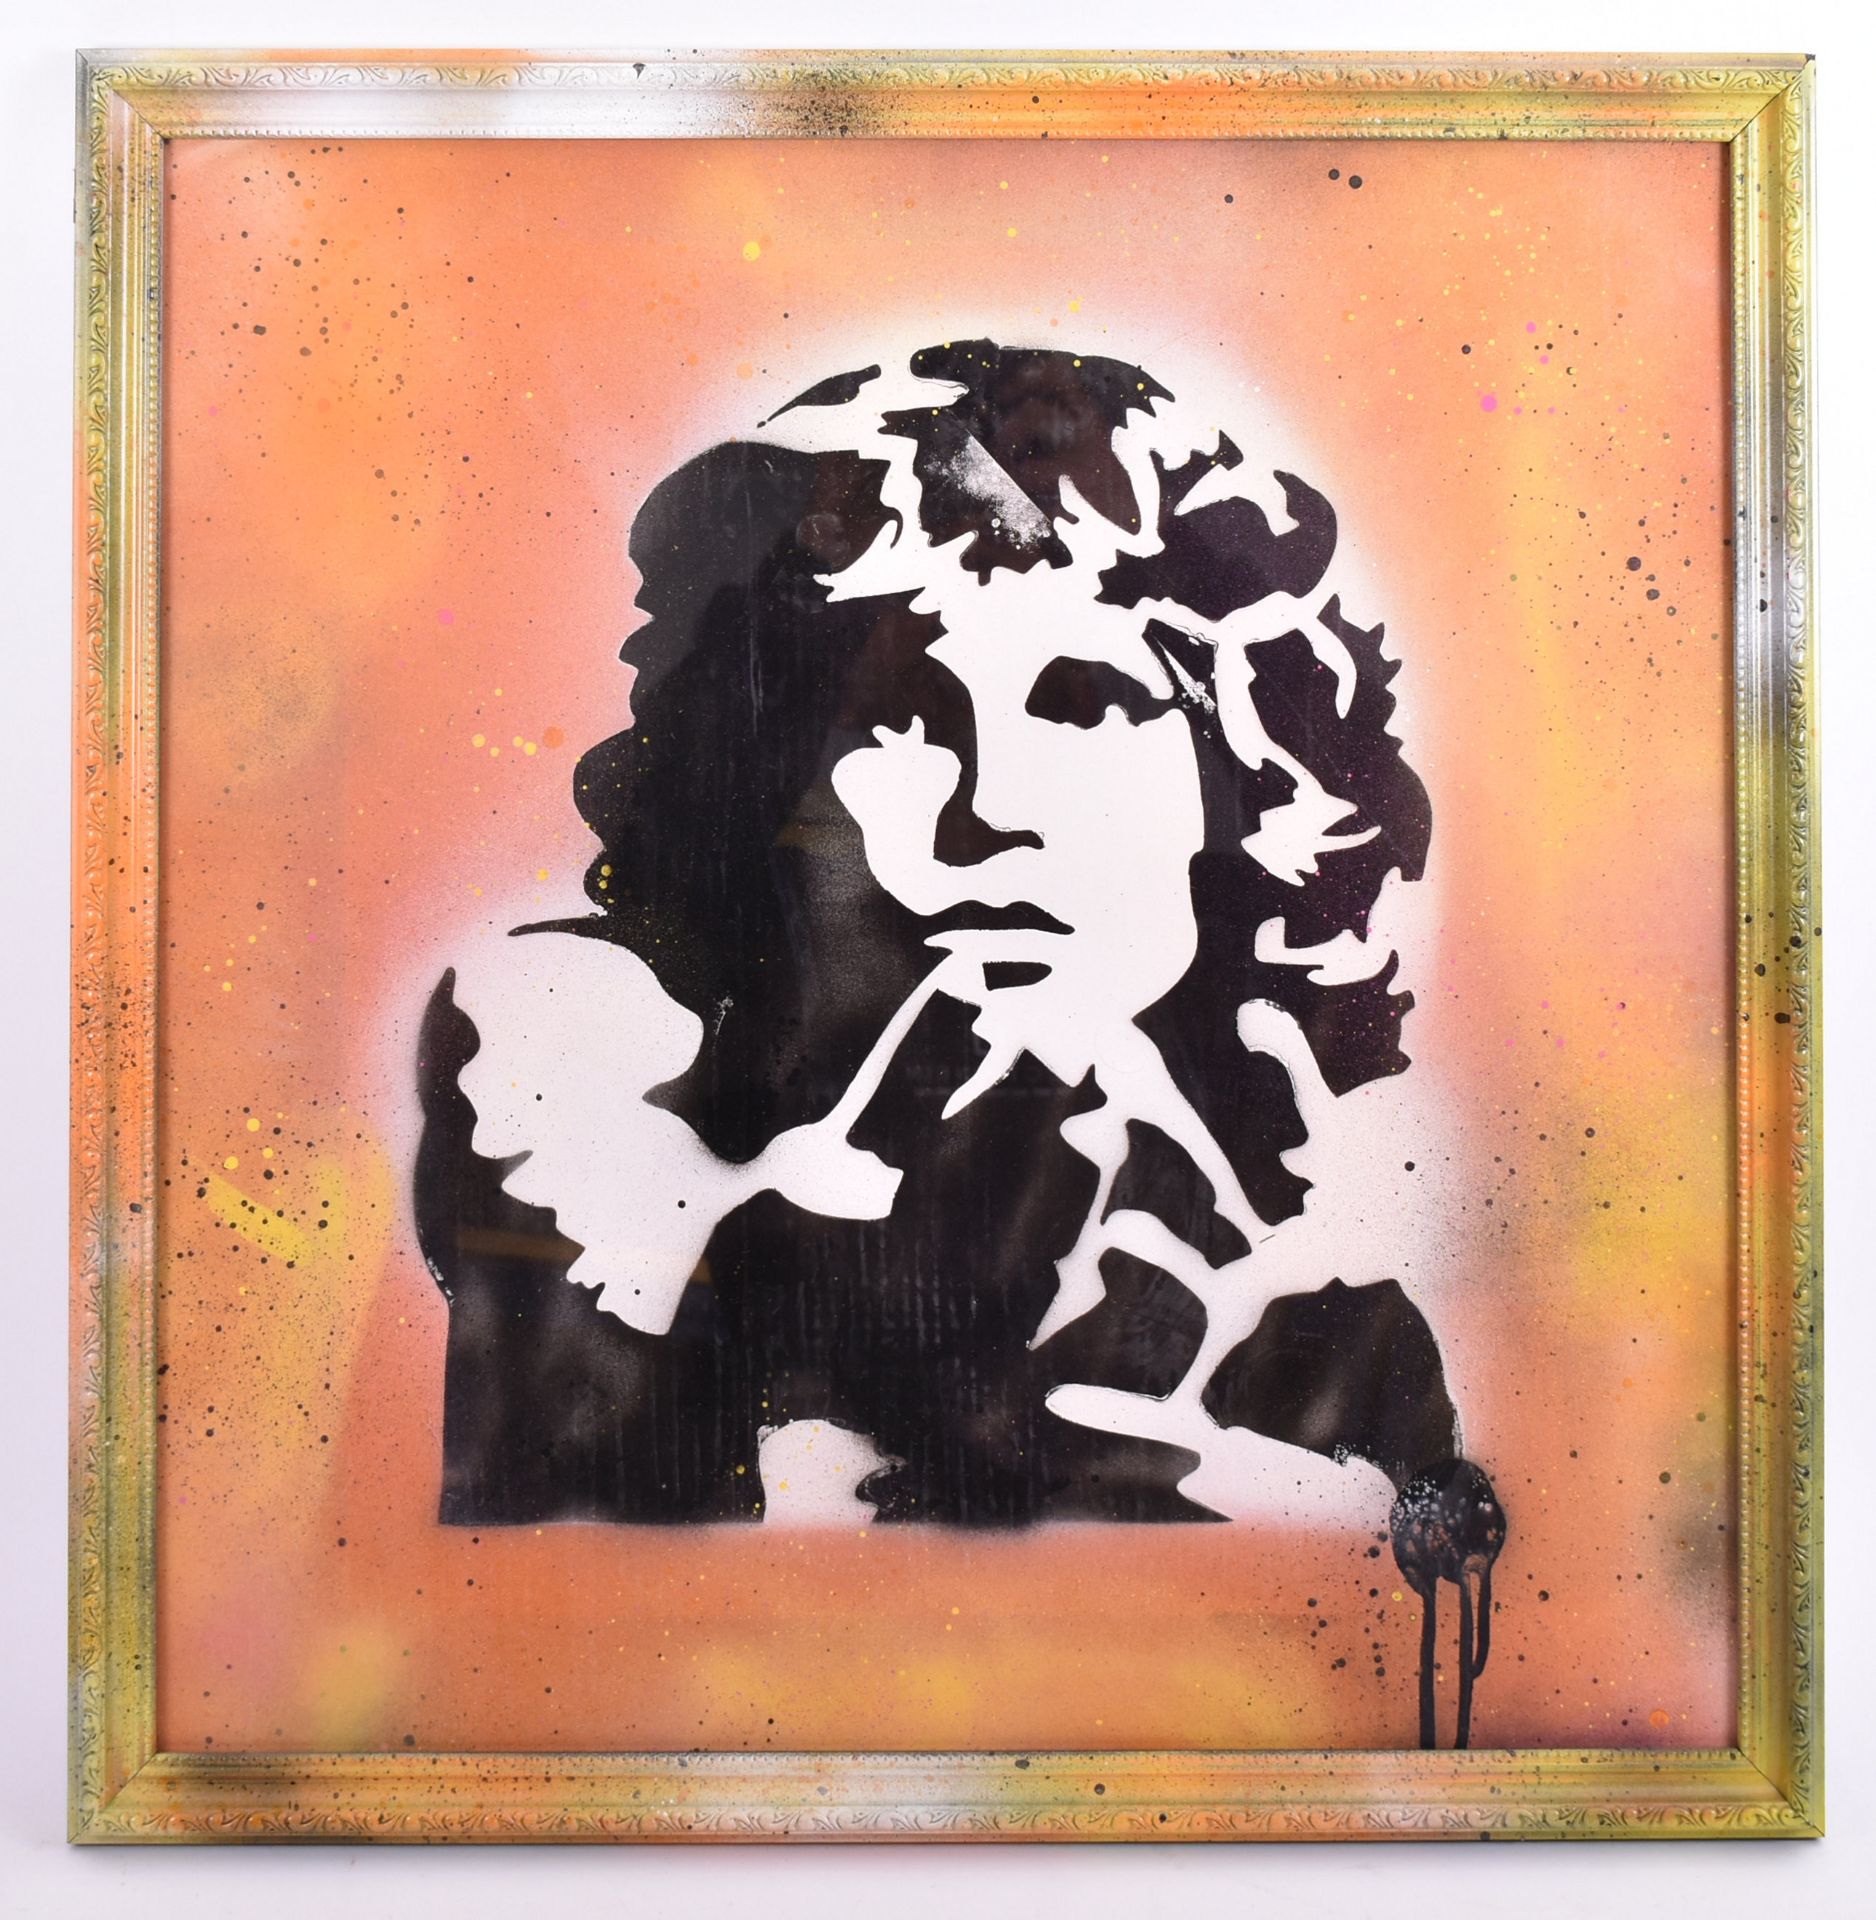 DAVID HUDSON - A COLLECTION OF 4 STENCIL SPRAY PAINTINGS - Image 3 of 13